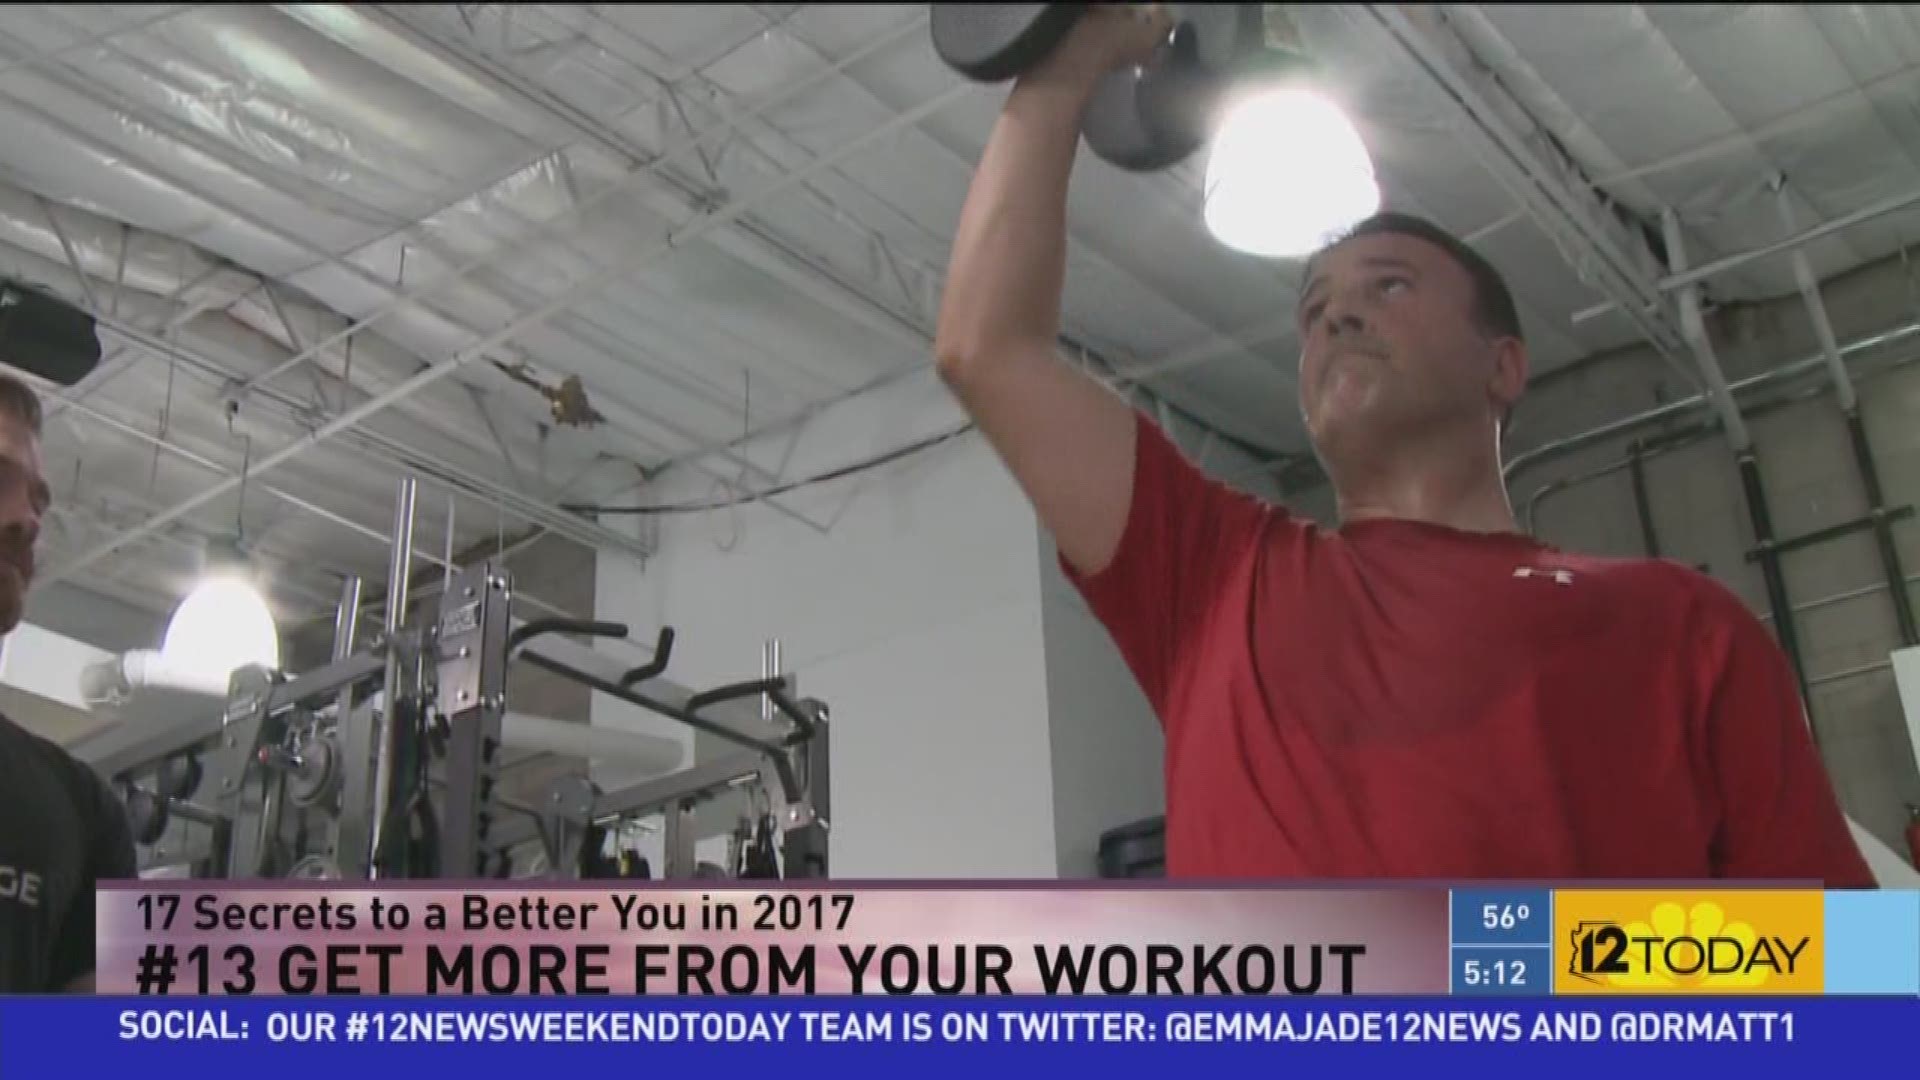 Here are tips from a fitness pro about how to get the most out of your workout.